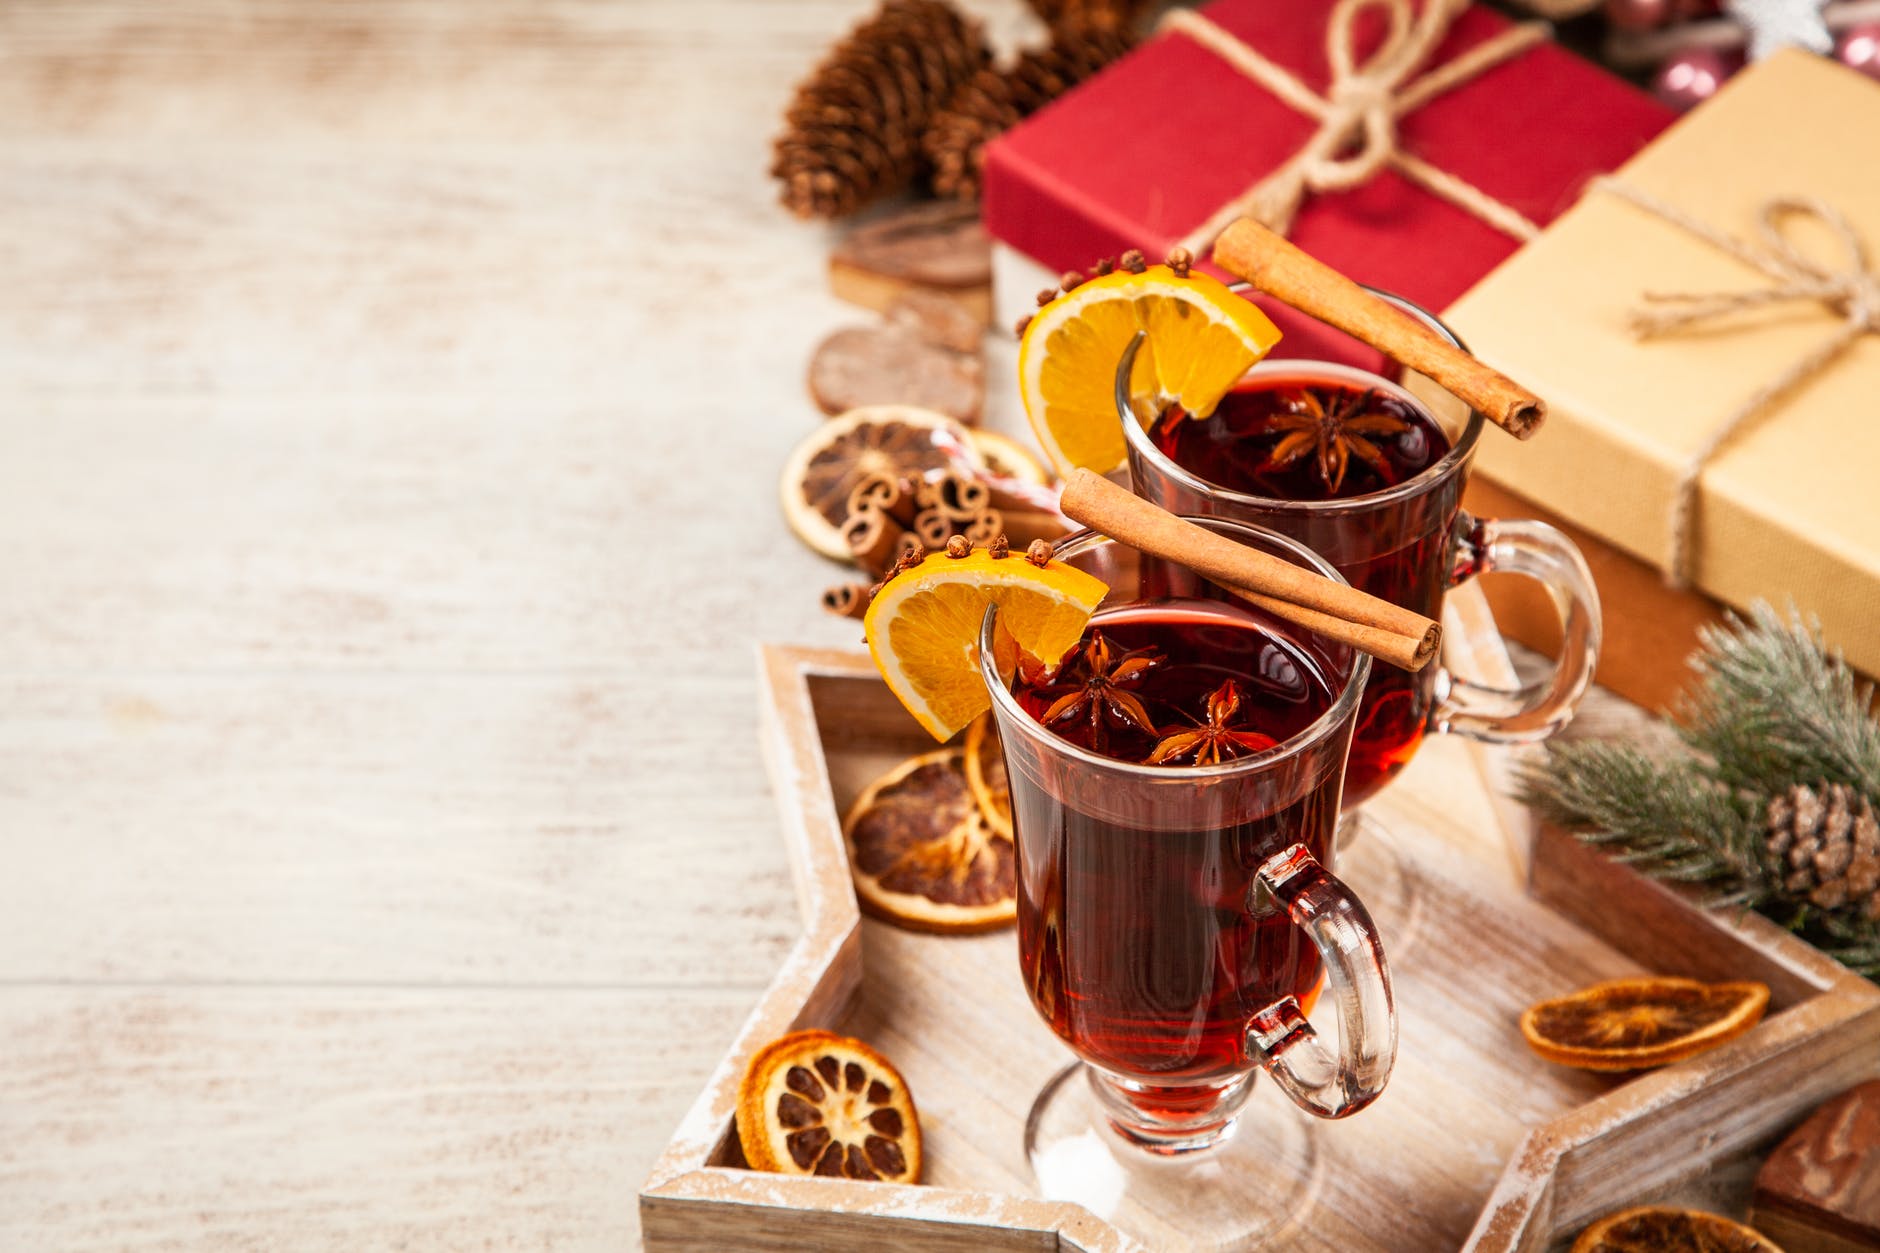 Star tray holding 2 cups of holiday drinks with oranges and cinnamon sticks as garnish. 